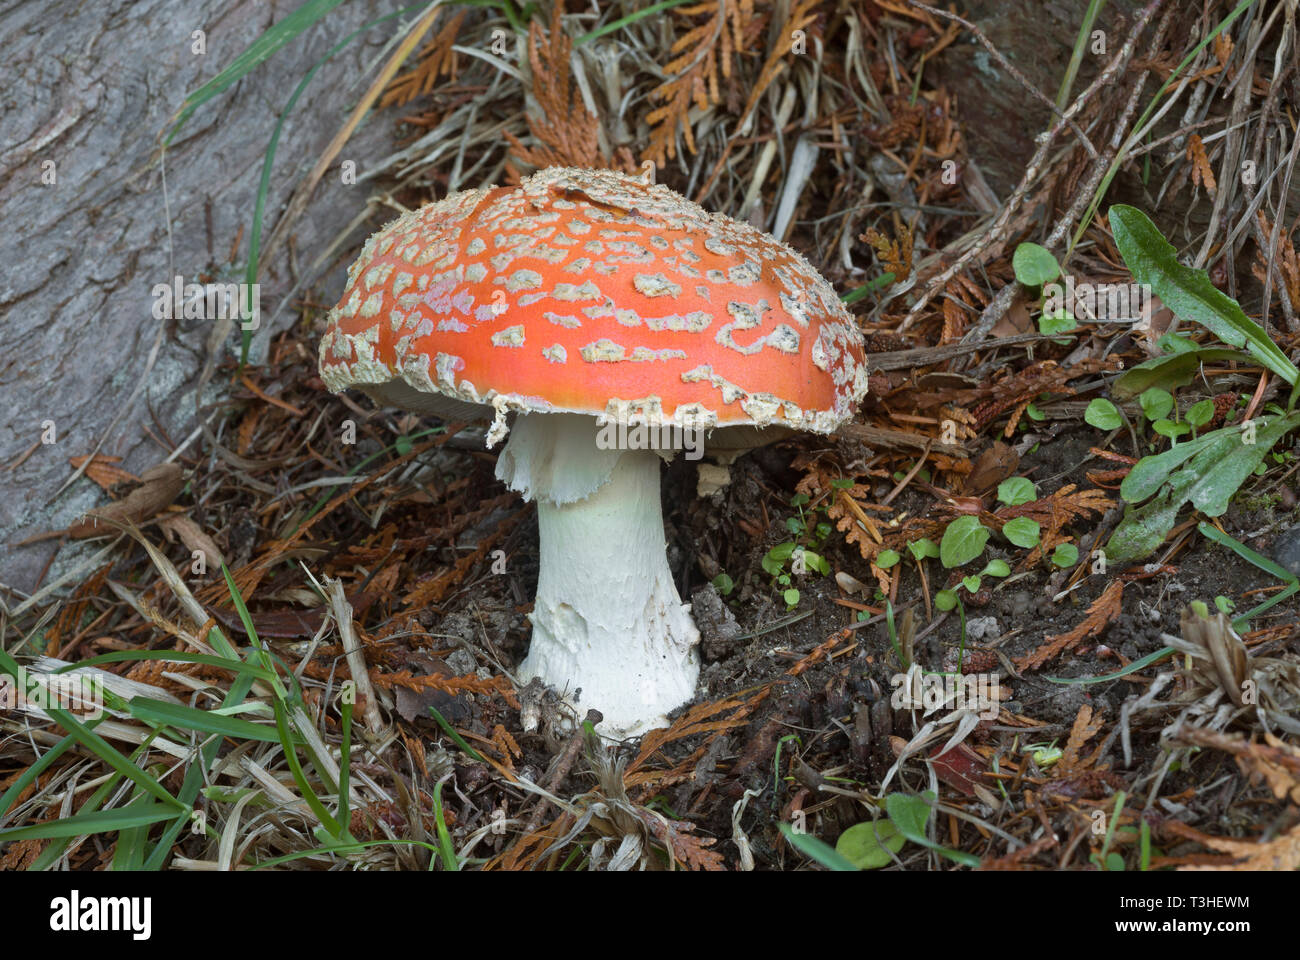 WA16121-00...WASHINGTON - A poisonous Fly Agaric mushroom growing under the shelter of a cedar tree in the Puget Sound Basin. Stock Photo